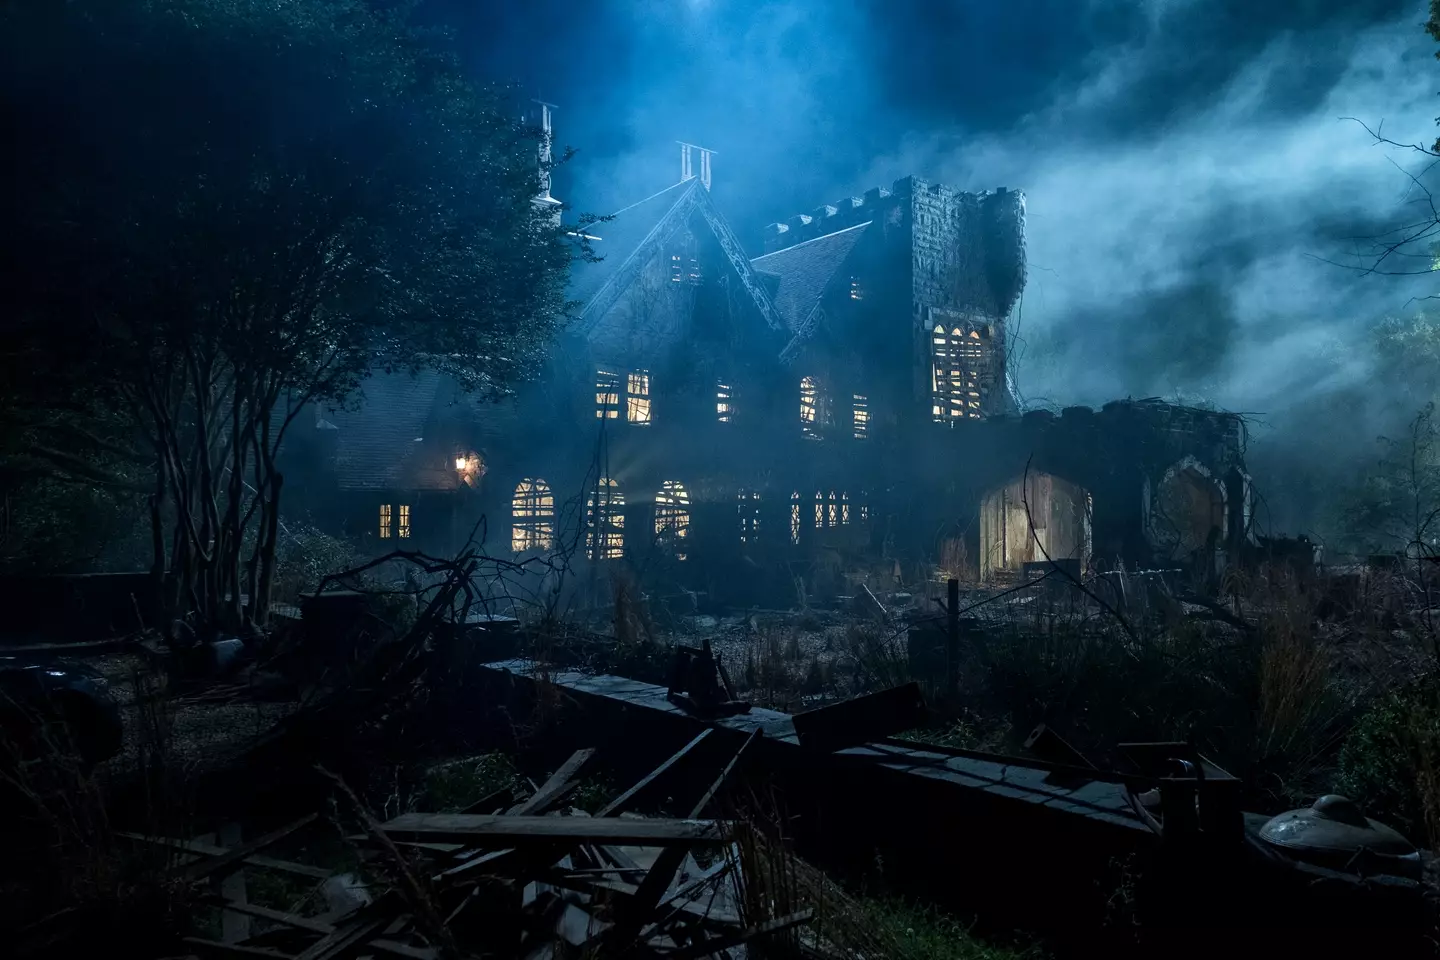 The Haunting of Hill House is still spooking people 5 years on.